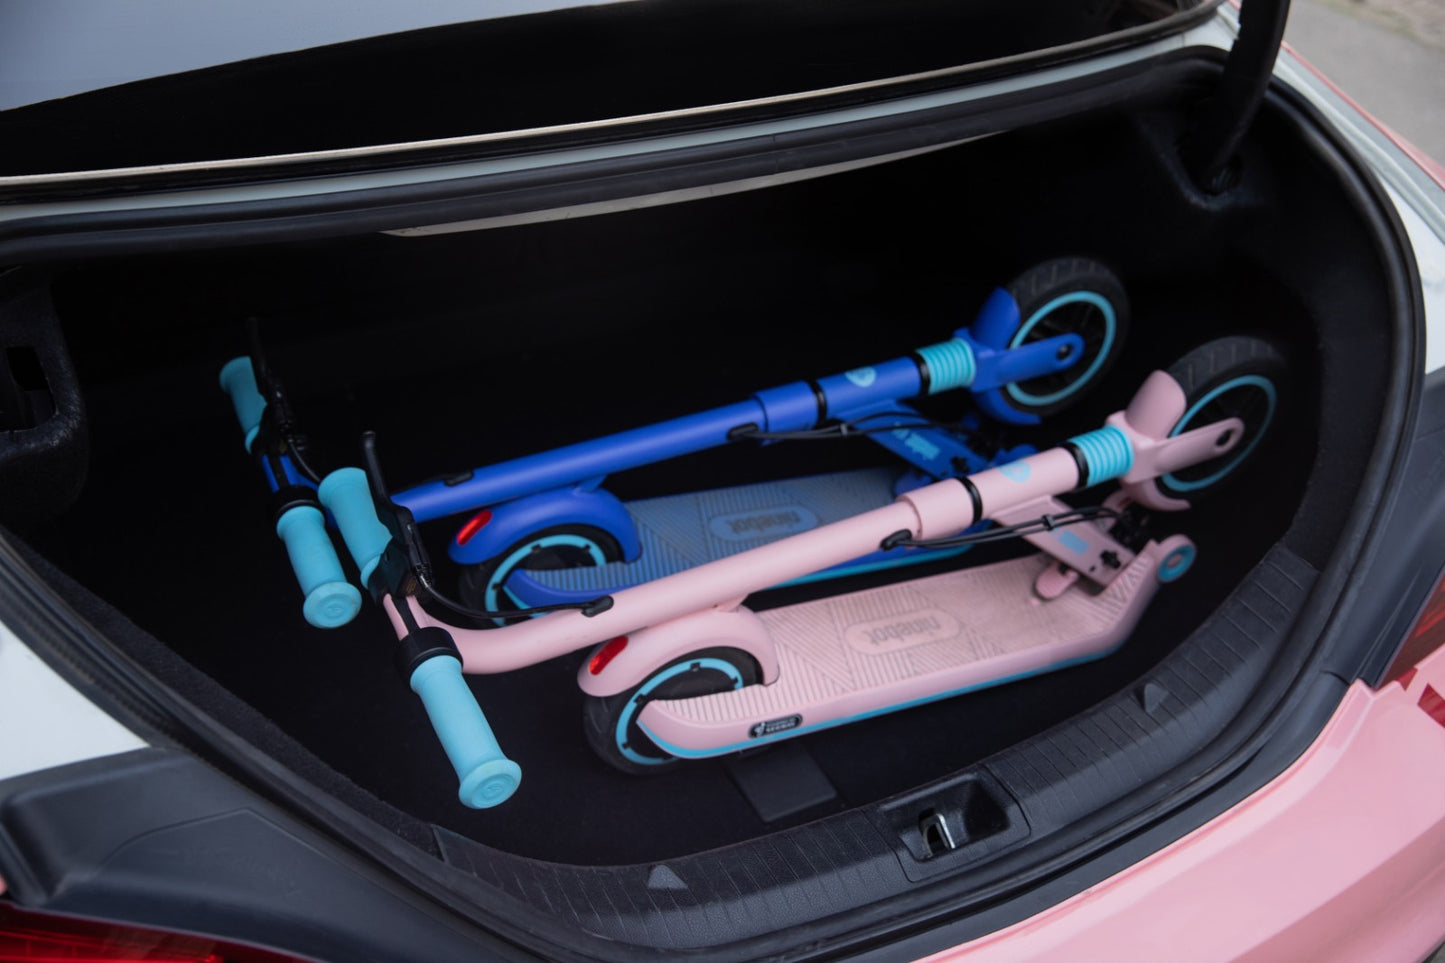 Two ninebot zing e8 in the trunk of a car. Folded and portable. One blue and one pink.